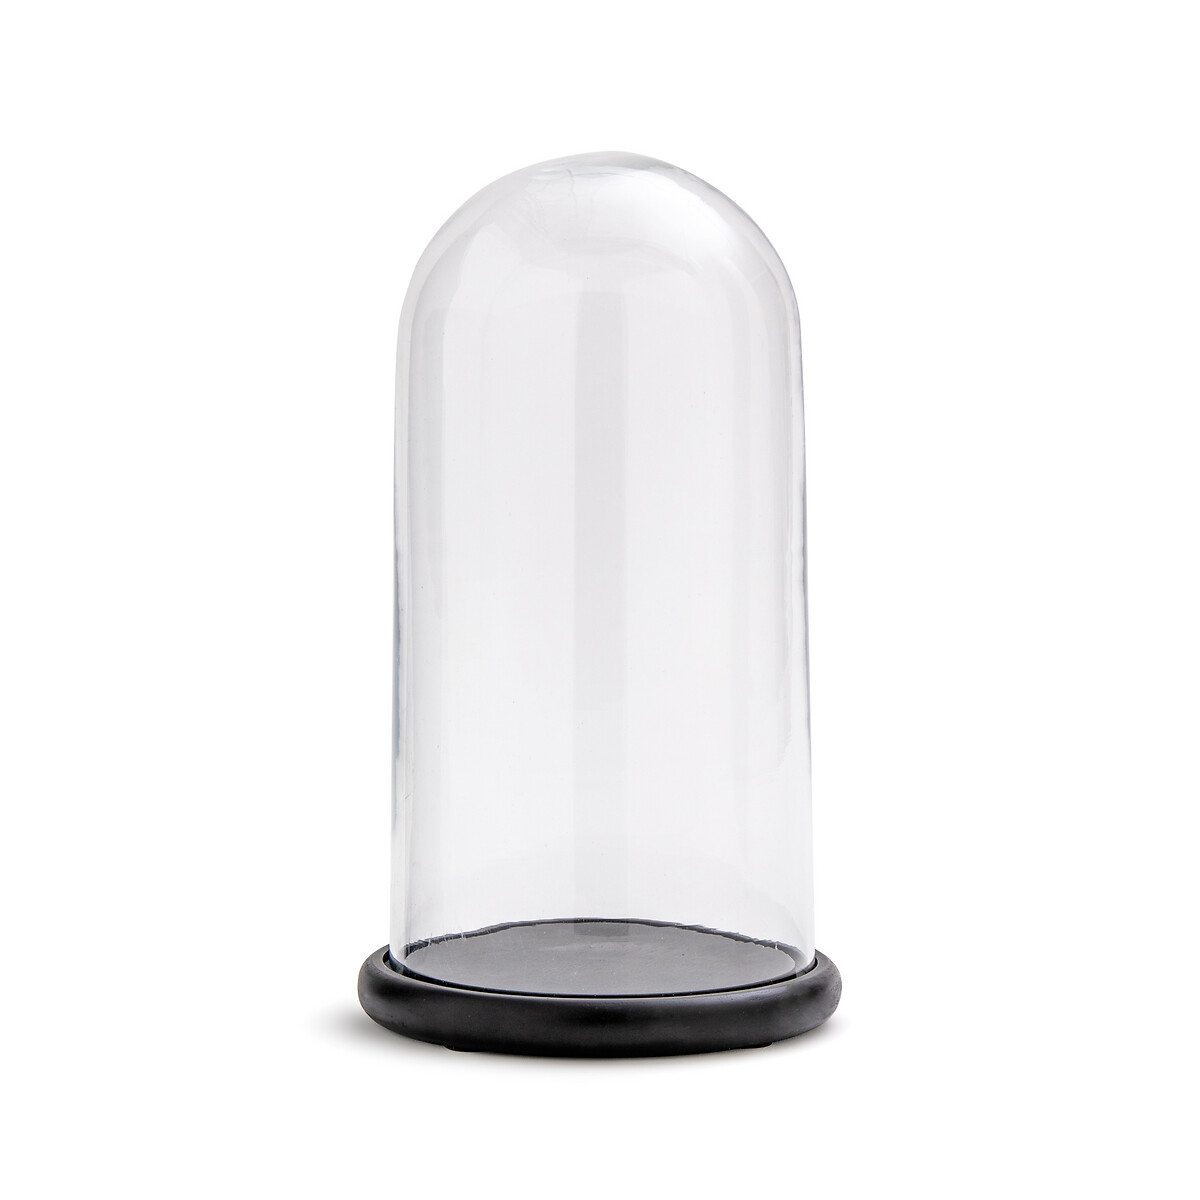 Campa Glass Bell Jar with Black Base